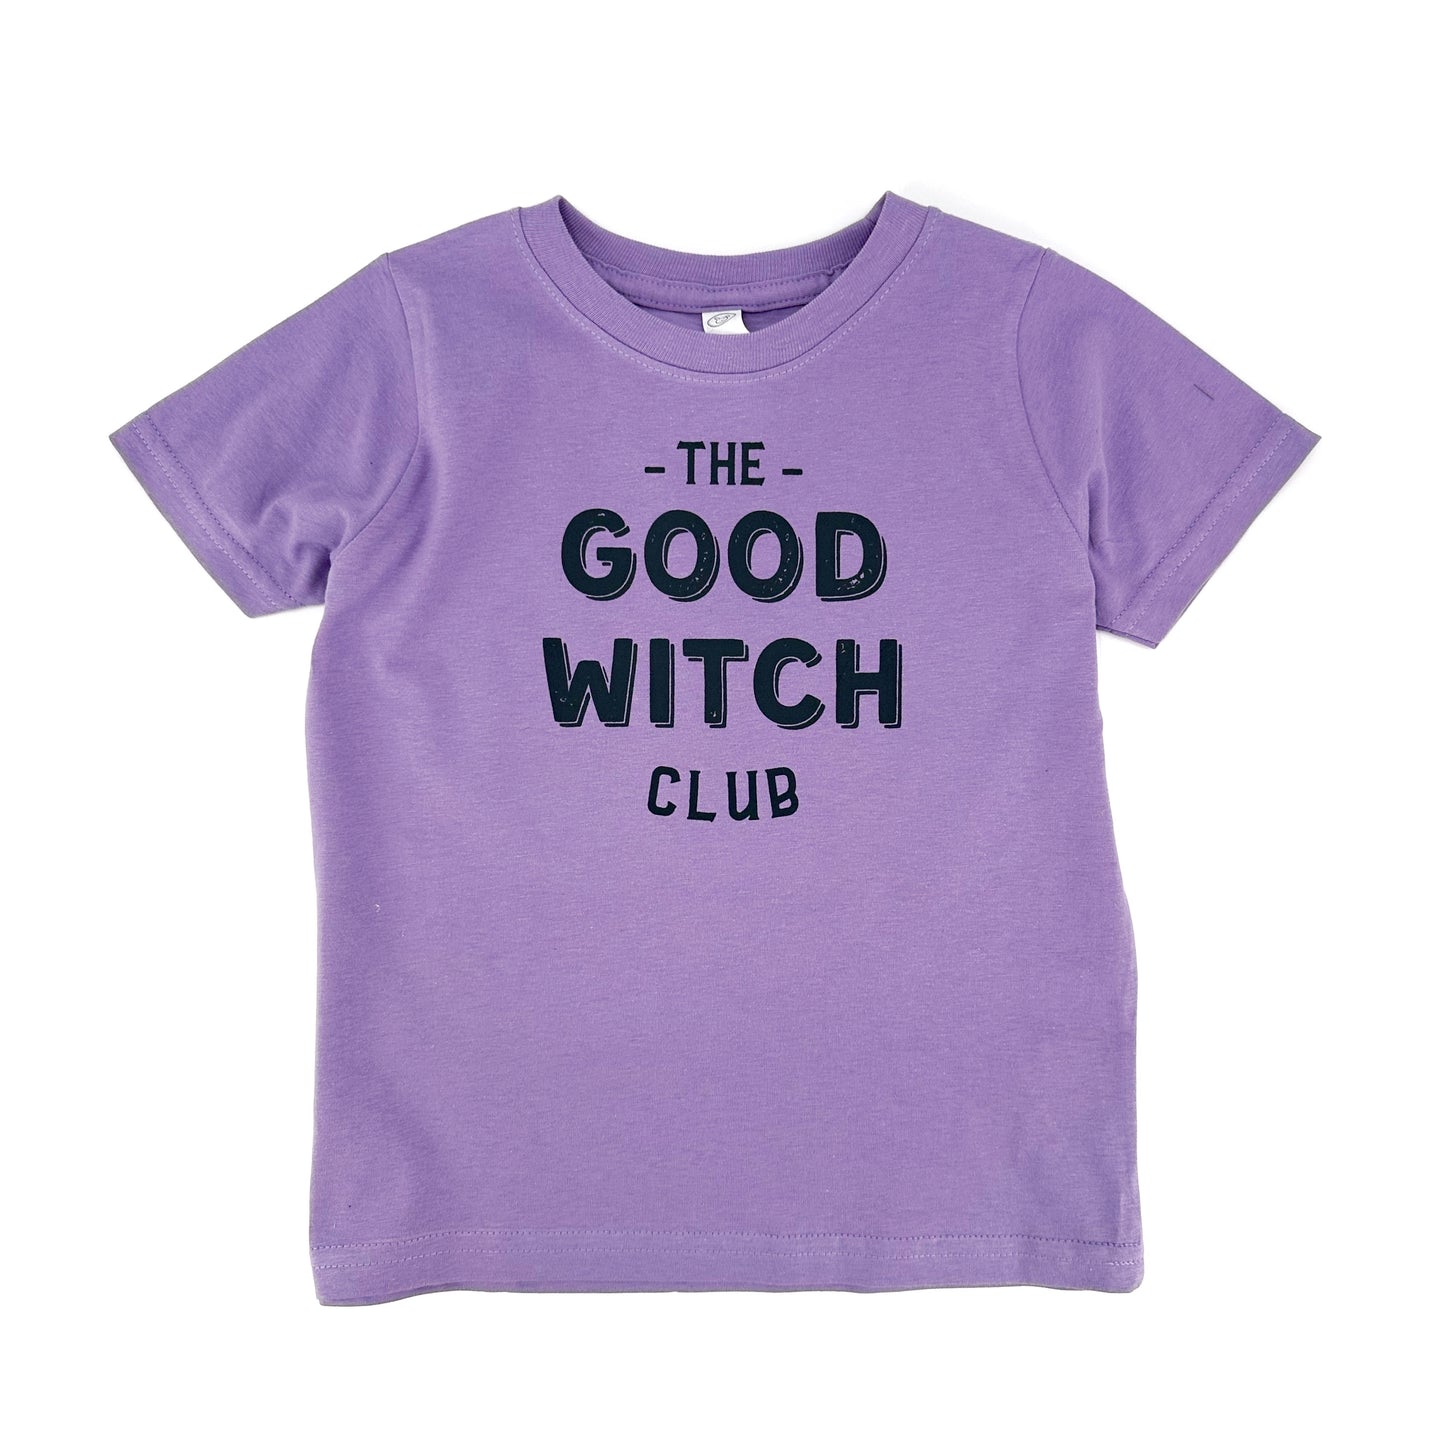 The Good Witch Club tee